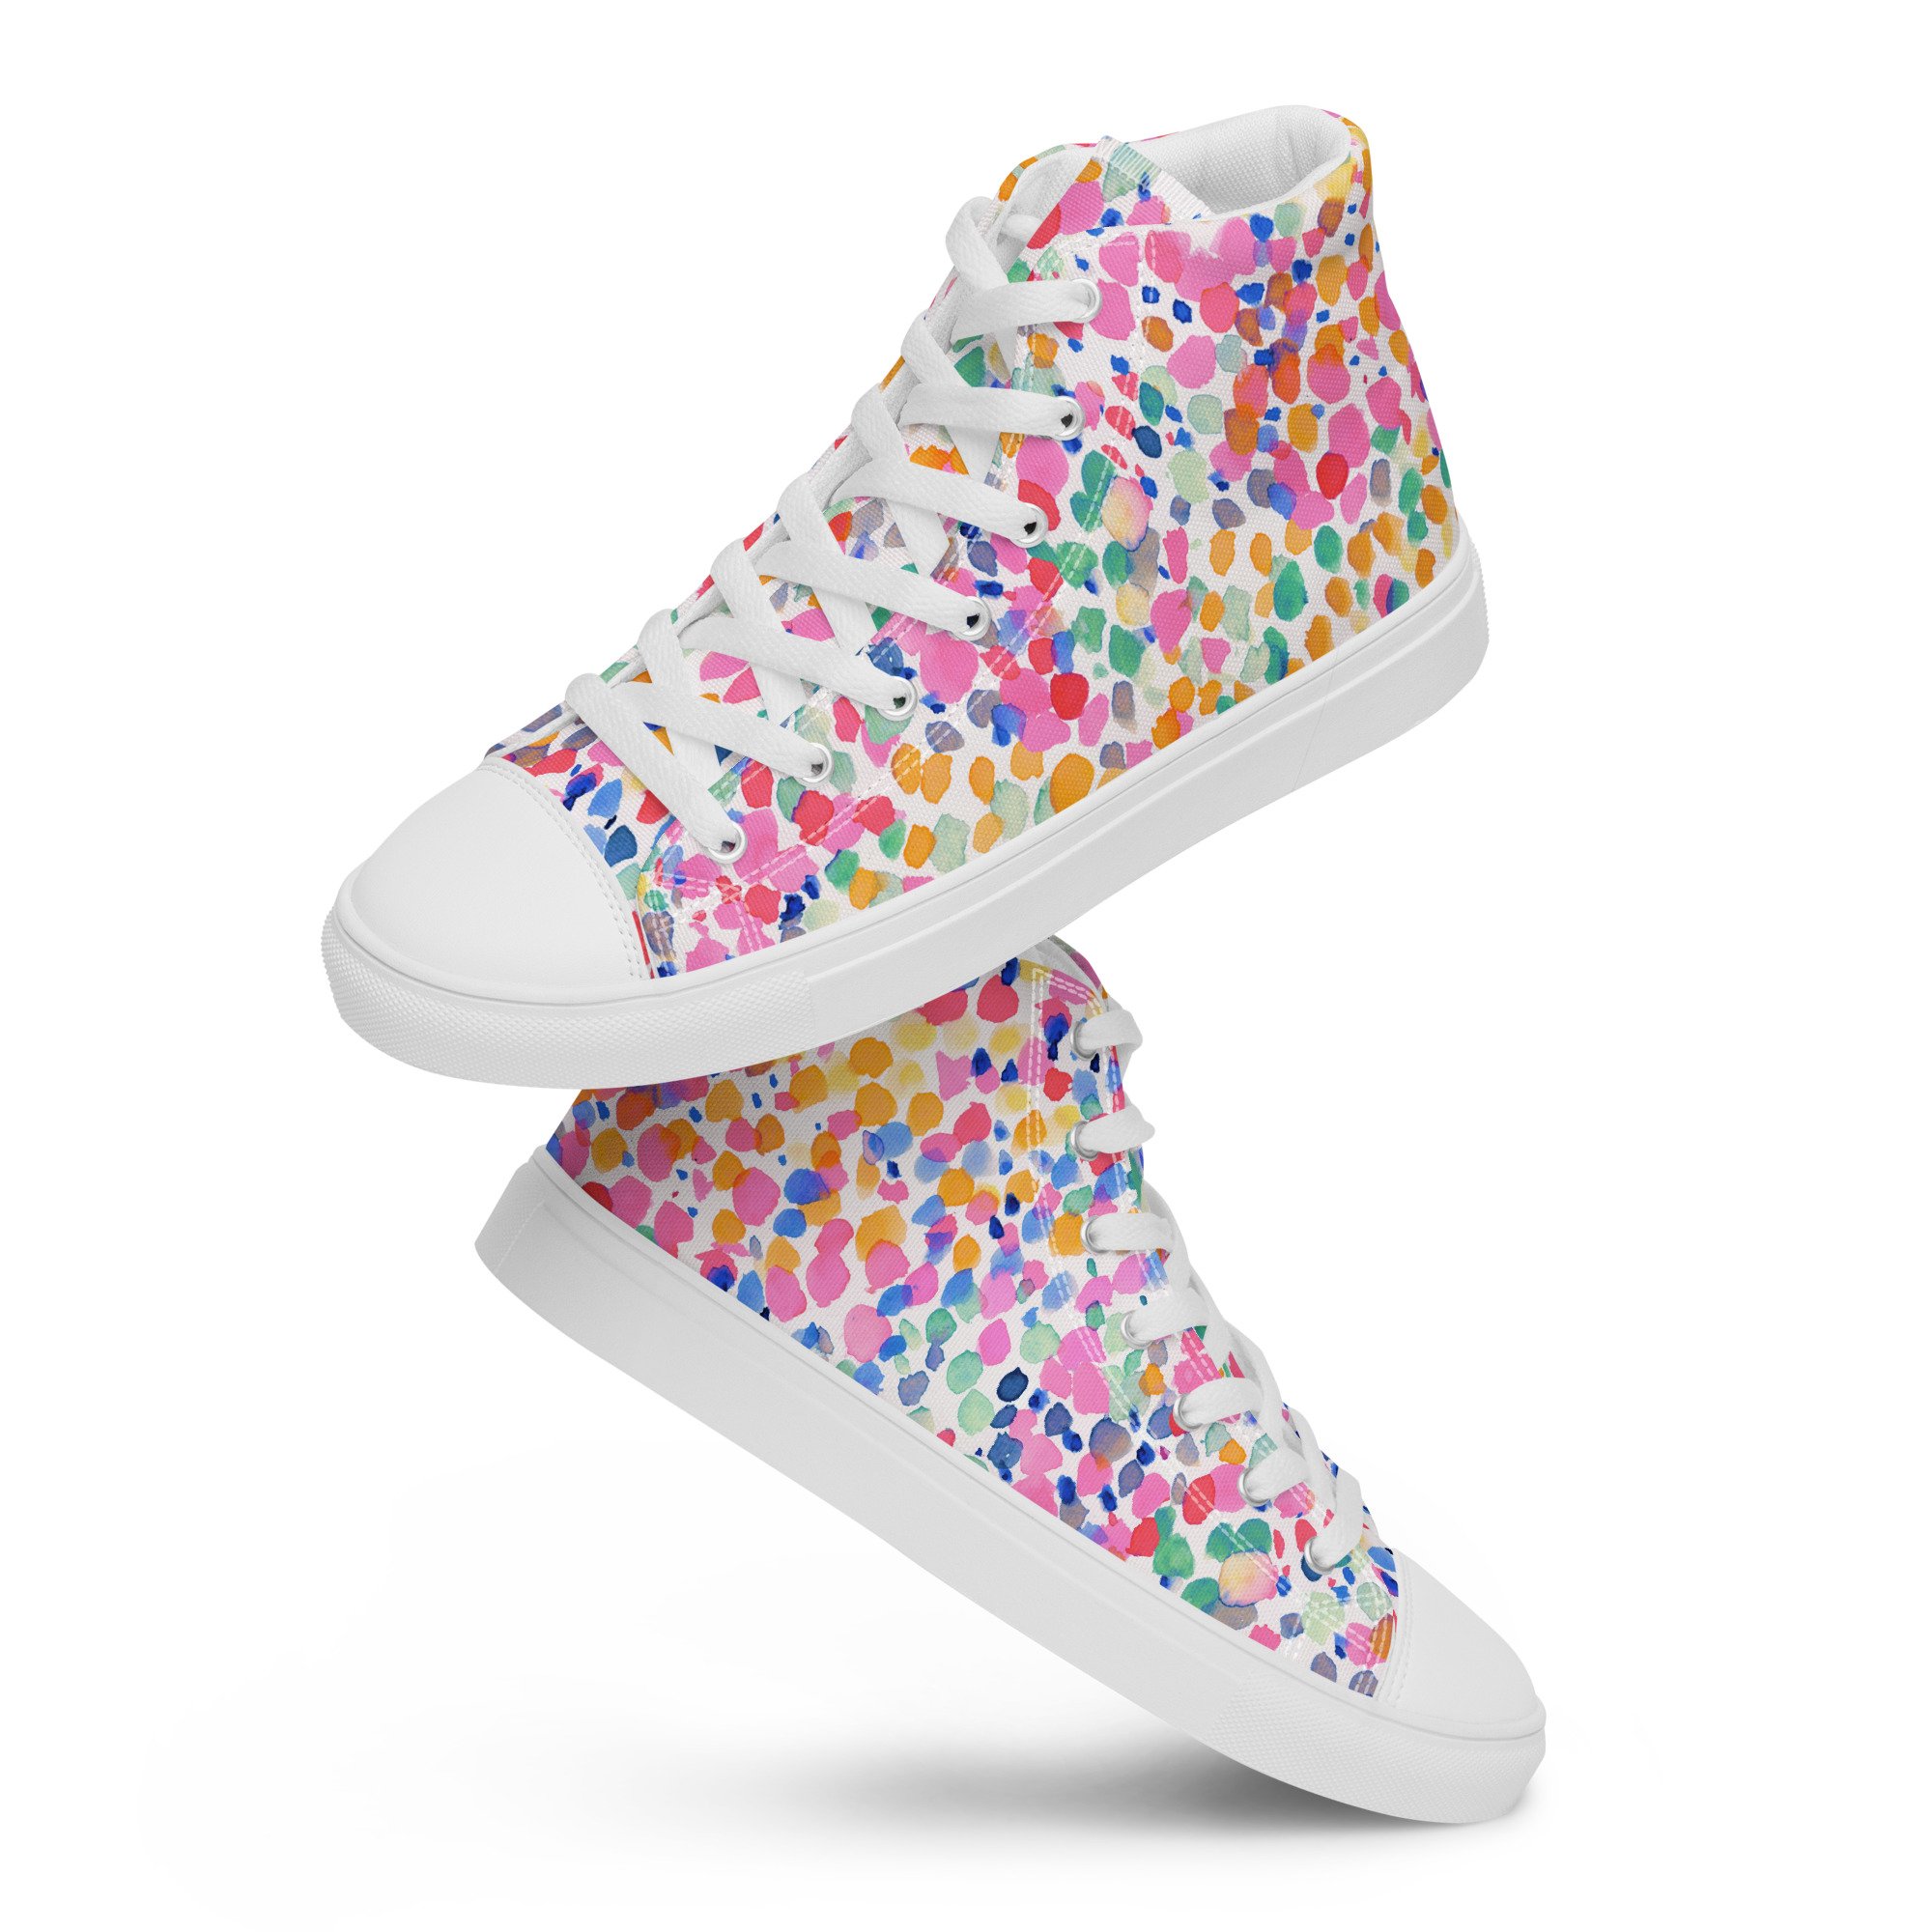 Discover 70+ colorful sneakers womens